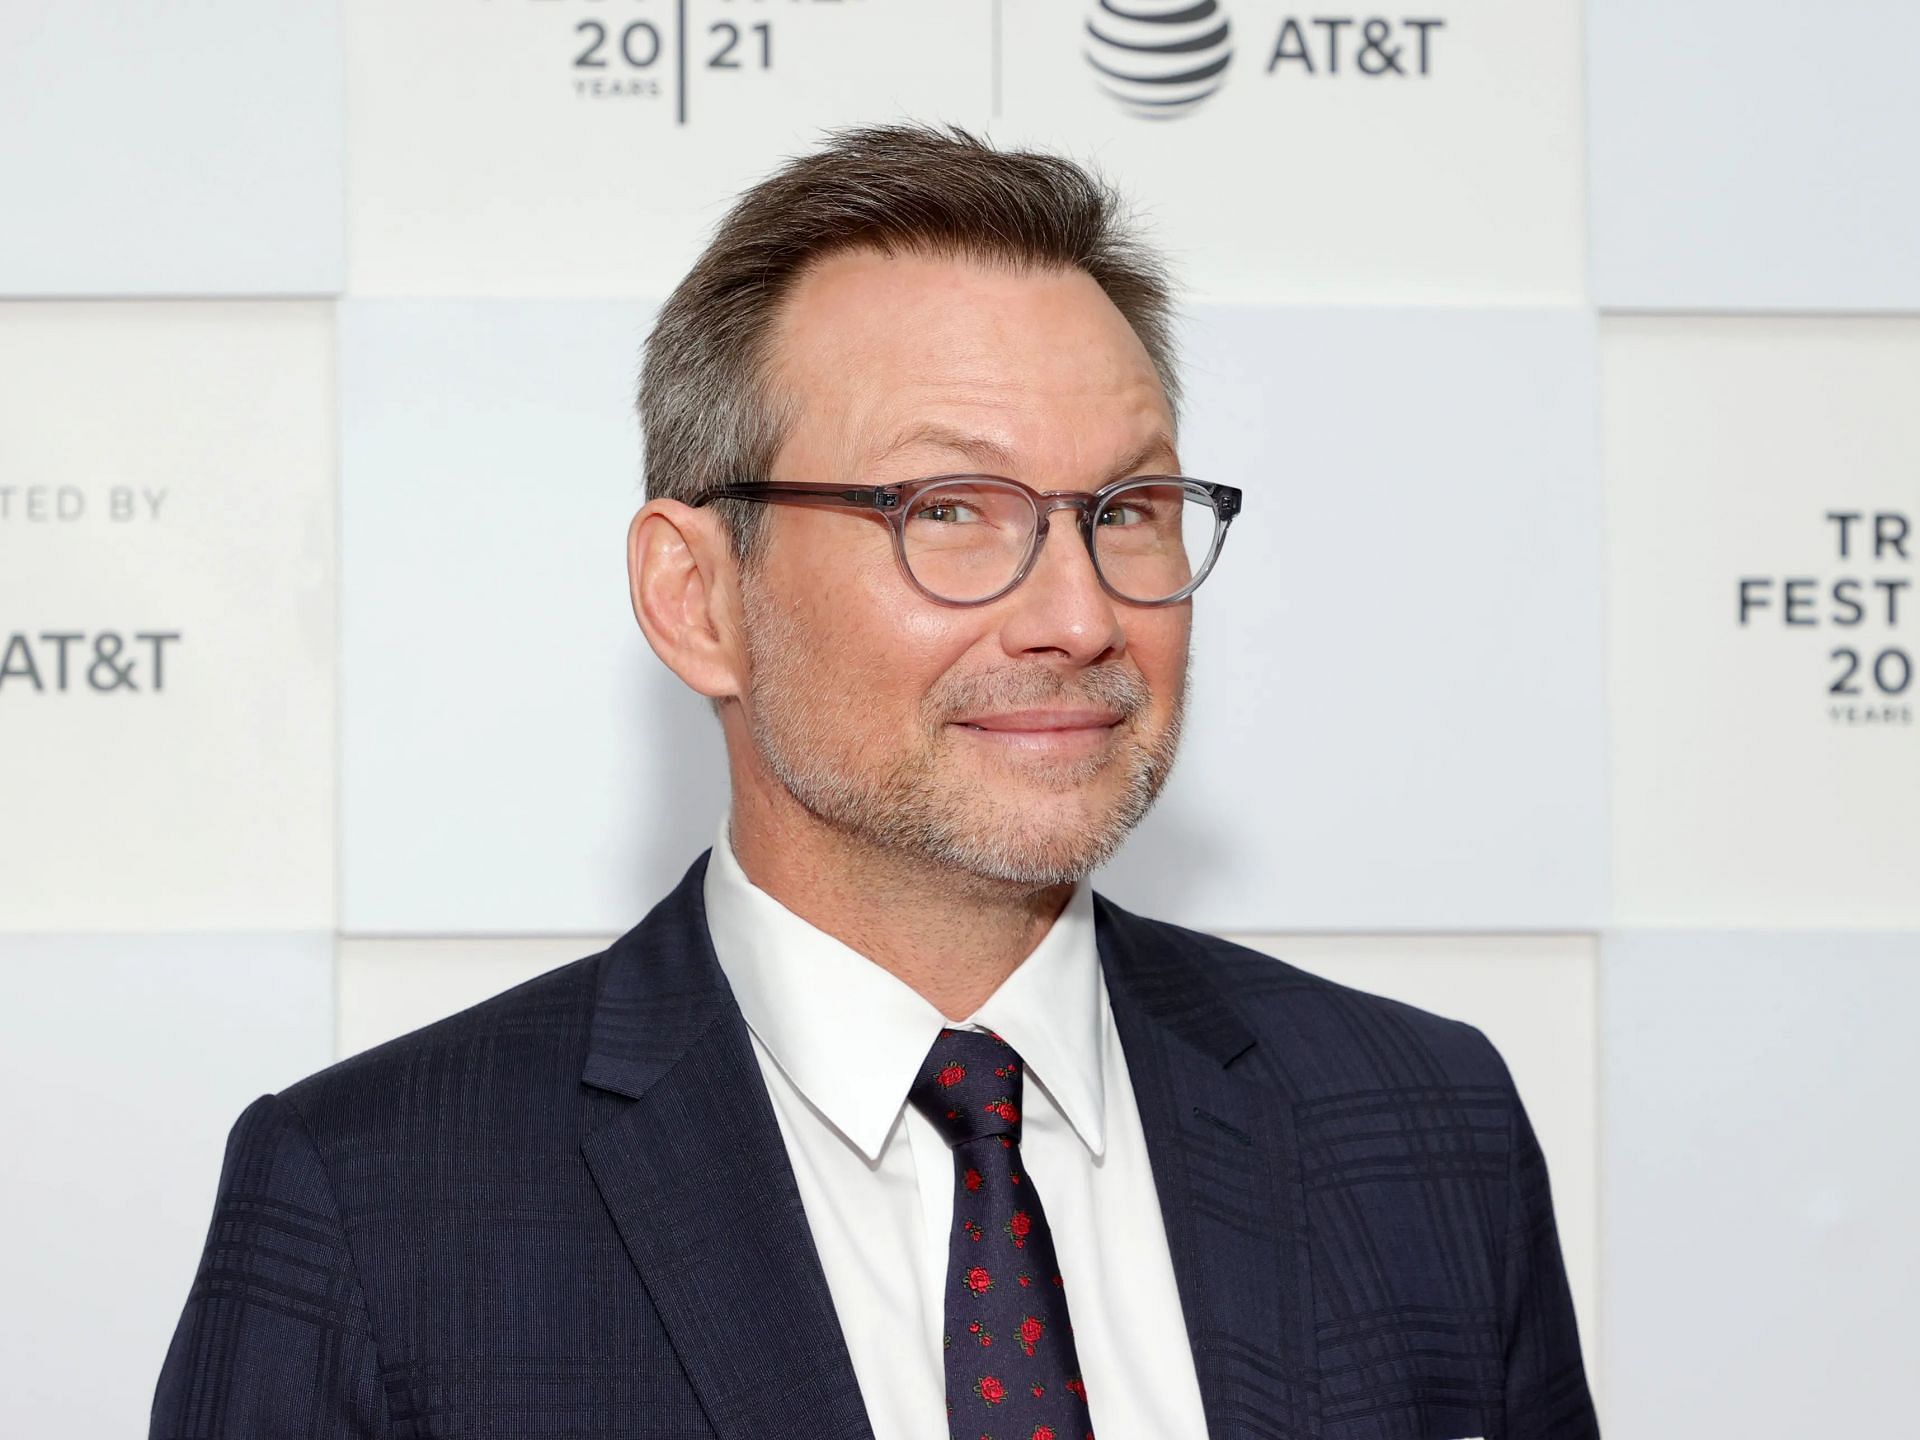 Christian Slater is set to appear on Disney+ show Willow (Image via Dia Dipasupil/Getty Images)